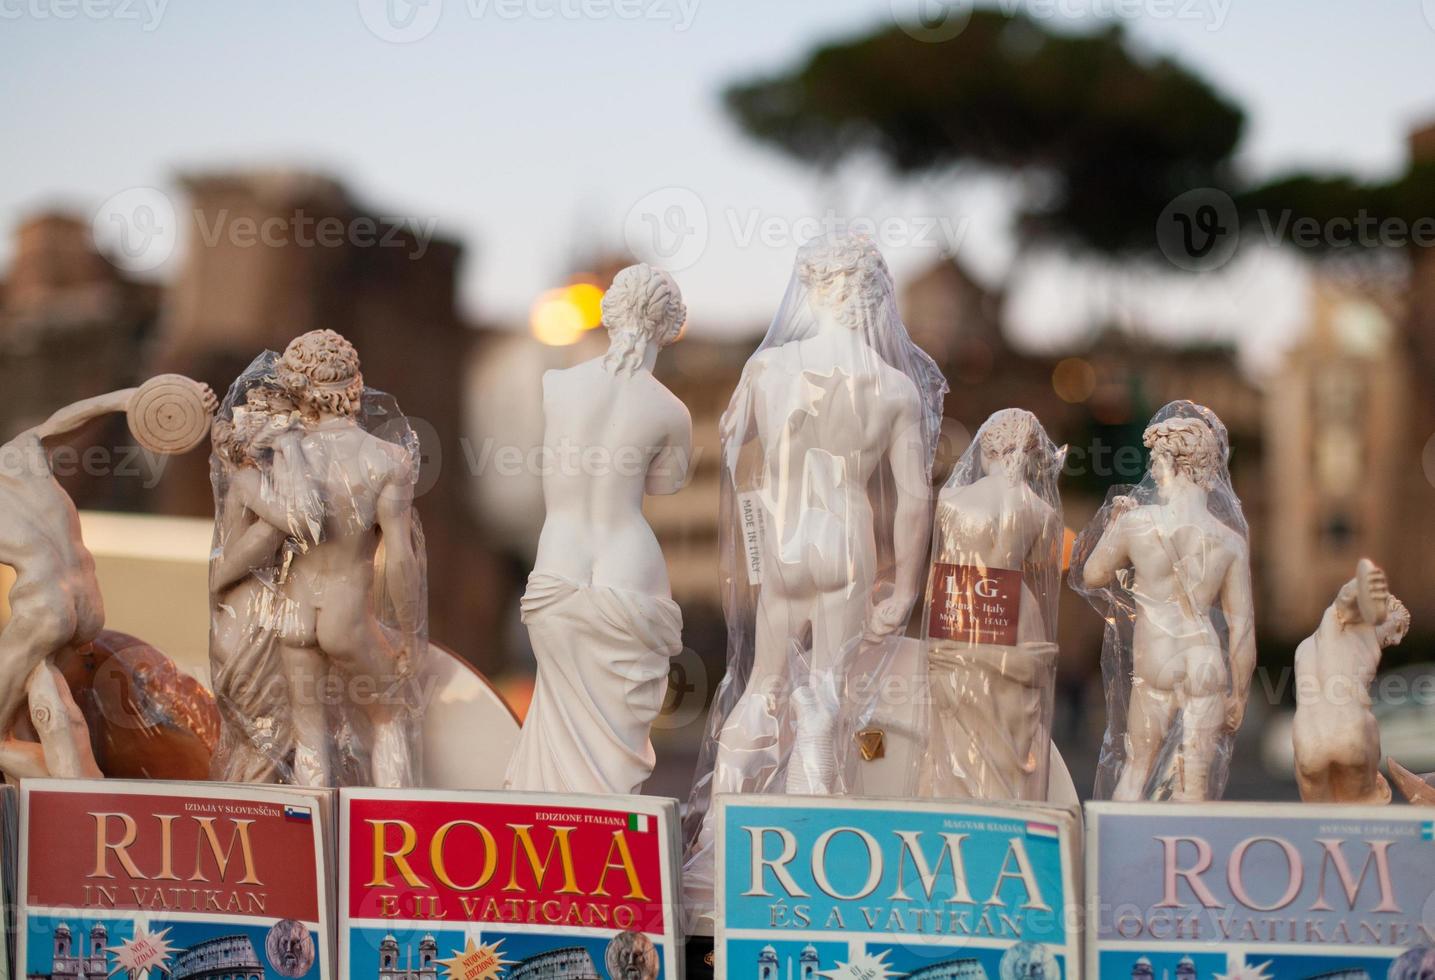 Naked sculptures are sold as souvenirs in Rome, Italy. photo